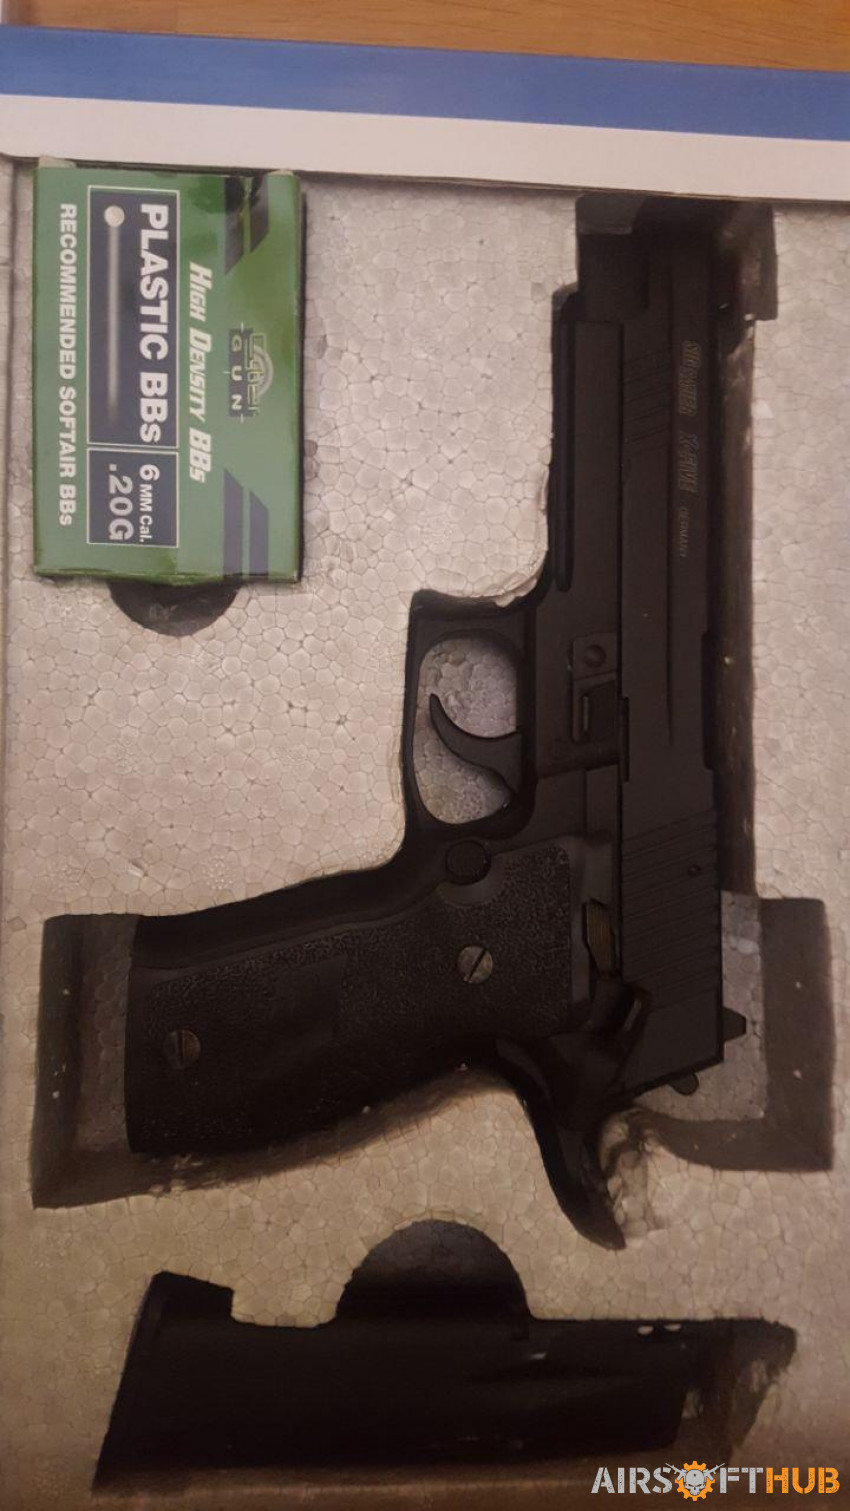 Cybergun SIG P226 X-Five - Used airsoft equipment